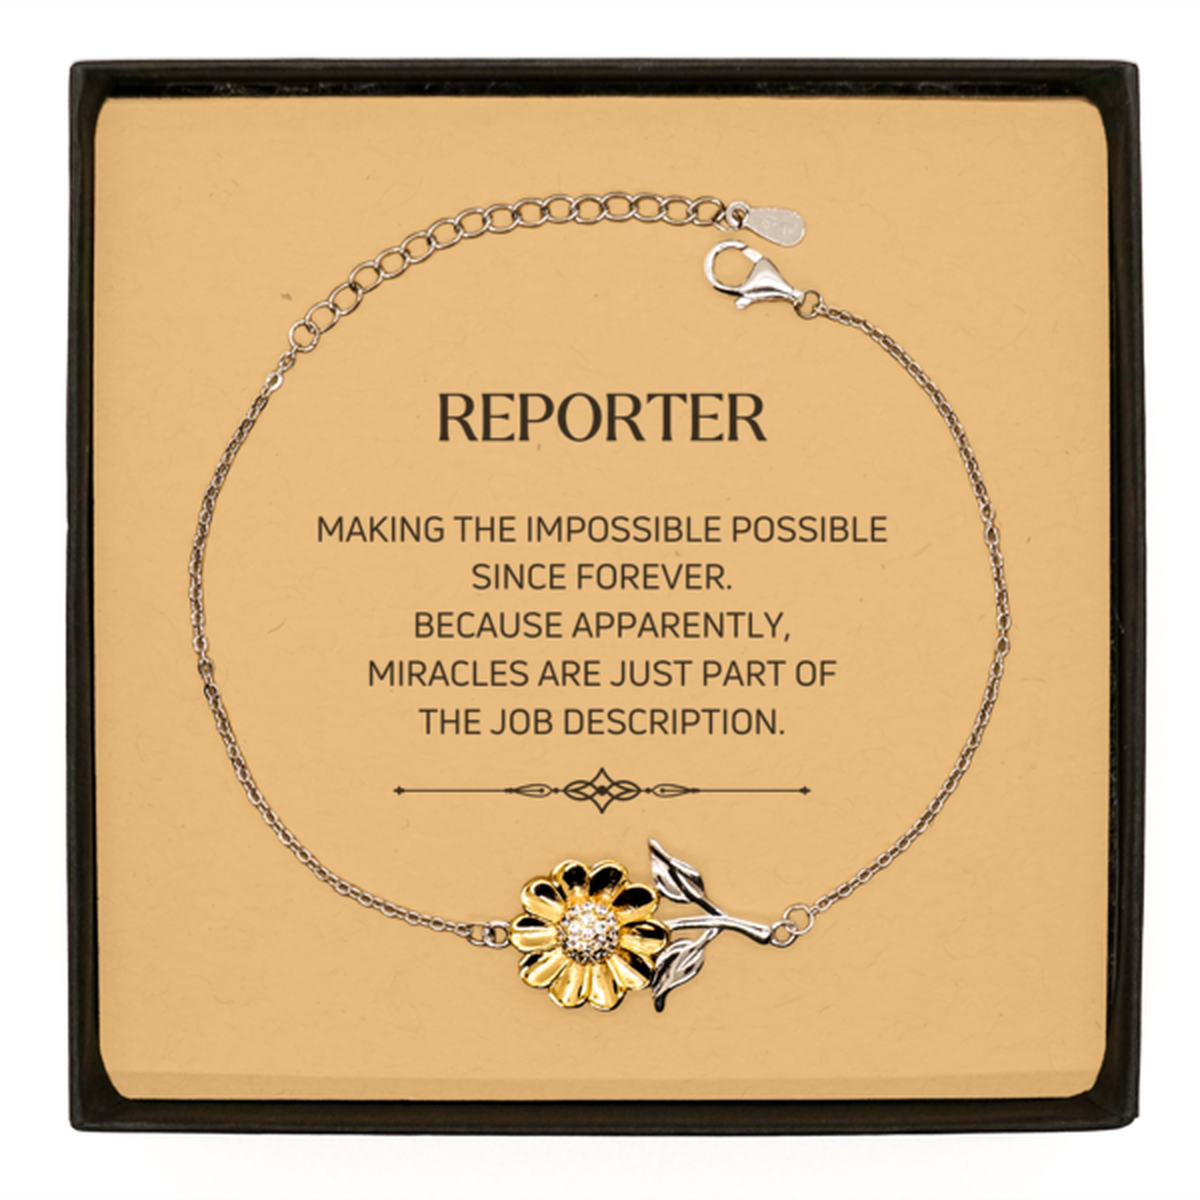 Funny Reporter Gifts, Miracles are just part of the job description, Inspirational Birthday Sunflower Bracelet For Reporter, Men, Women, Coworkers, Friends, Boss